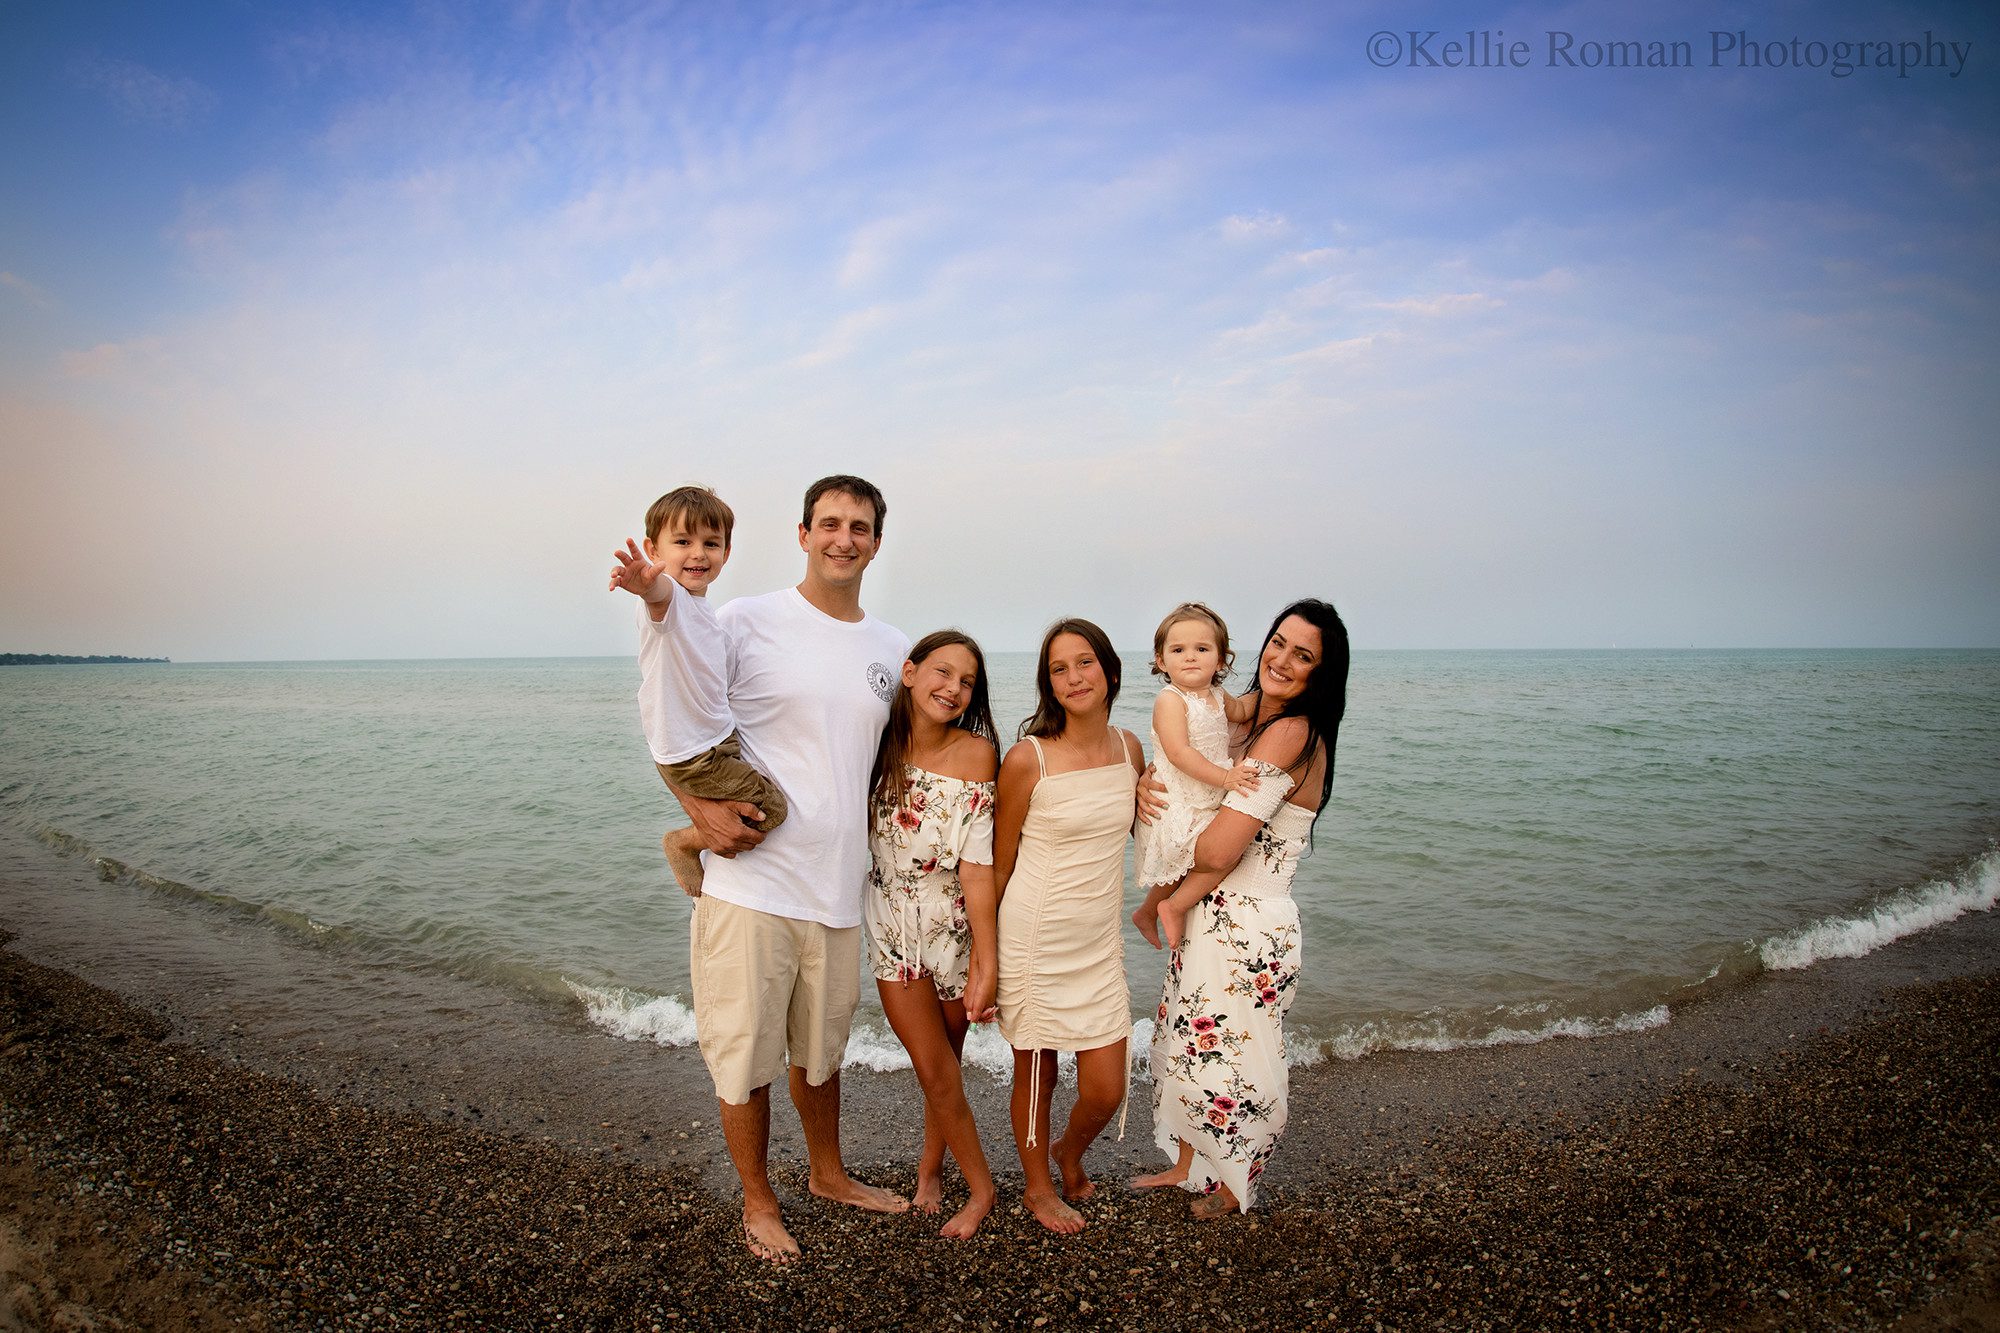 milwaukee family photographer. a family of 6 with 4 children are standing on a beach along Lake Michigan. the family is wearing shades of cream and floral. the sky is bright blue, and the water is teal blue.